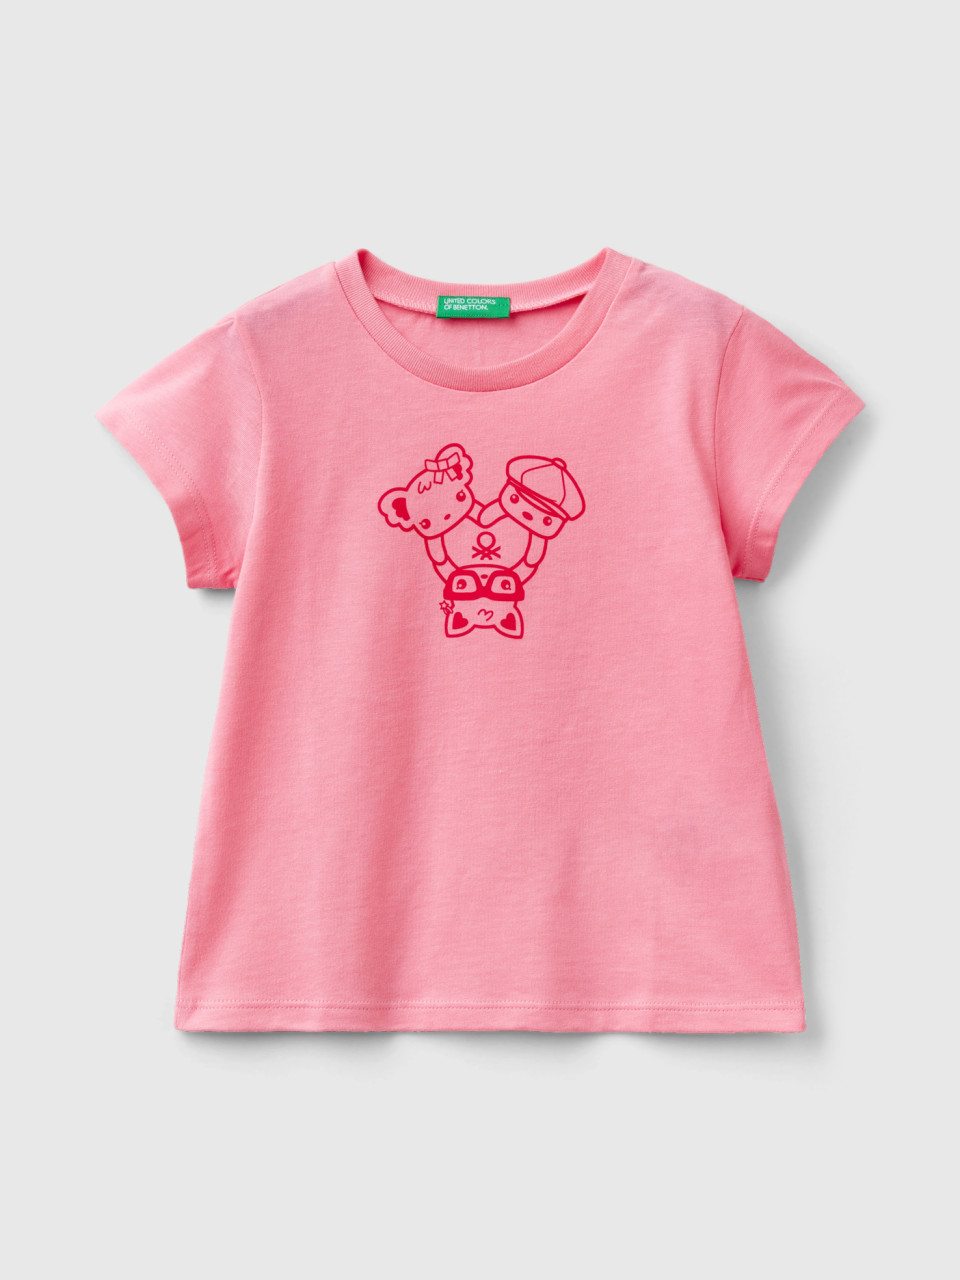 Benetton, 100% Cotton T-shirt With Print, Pink, Kids